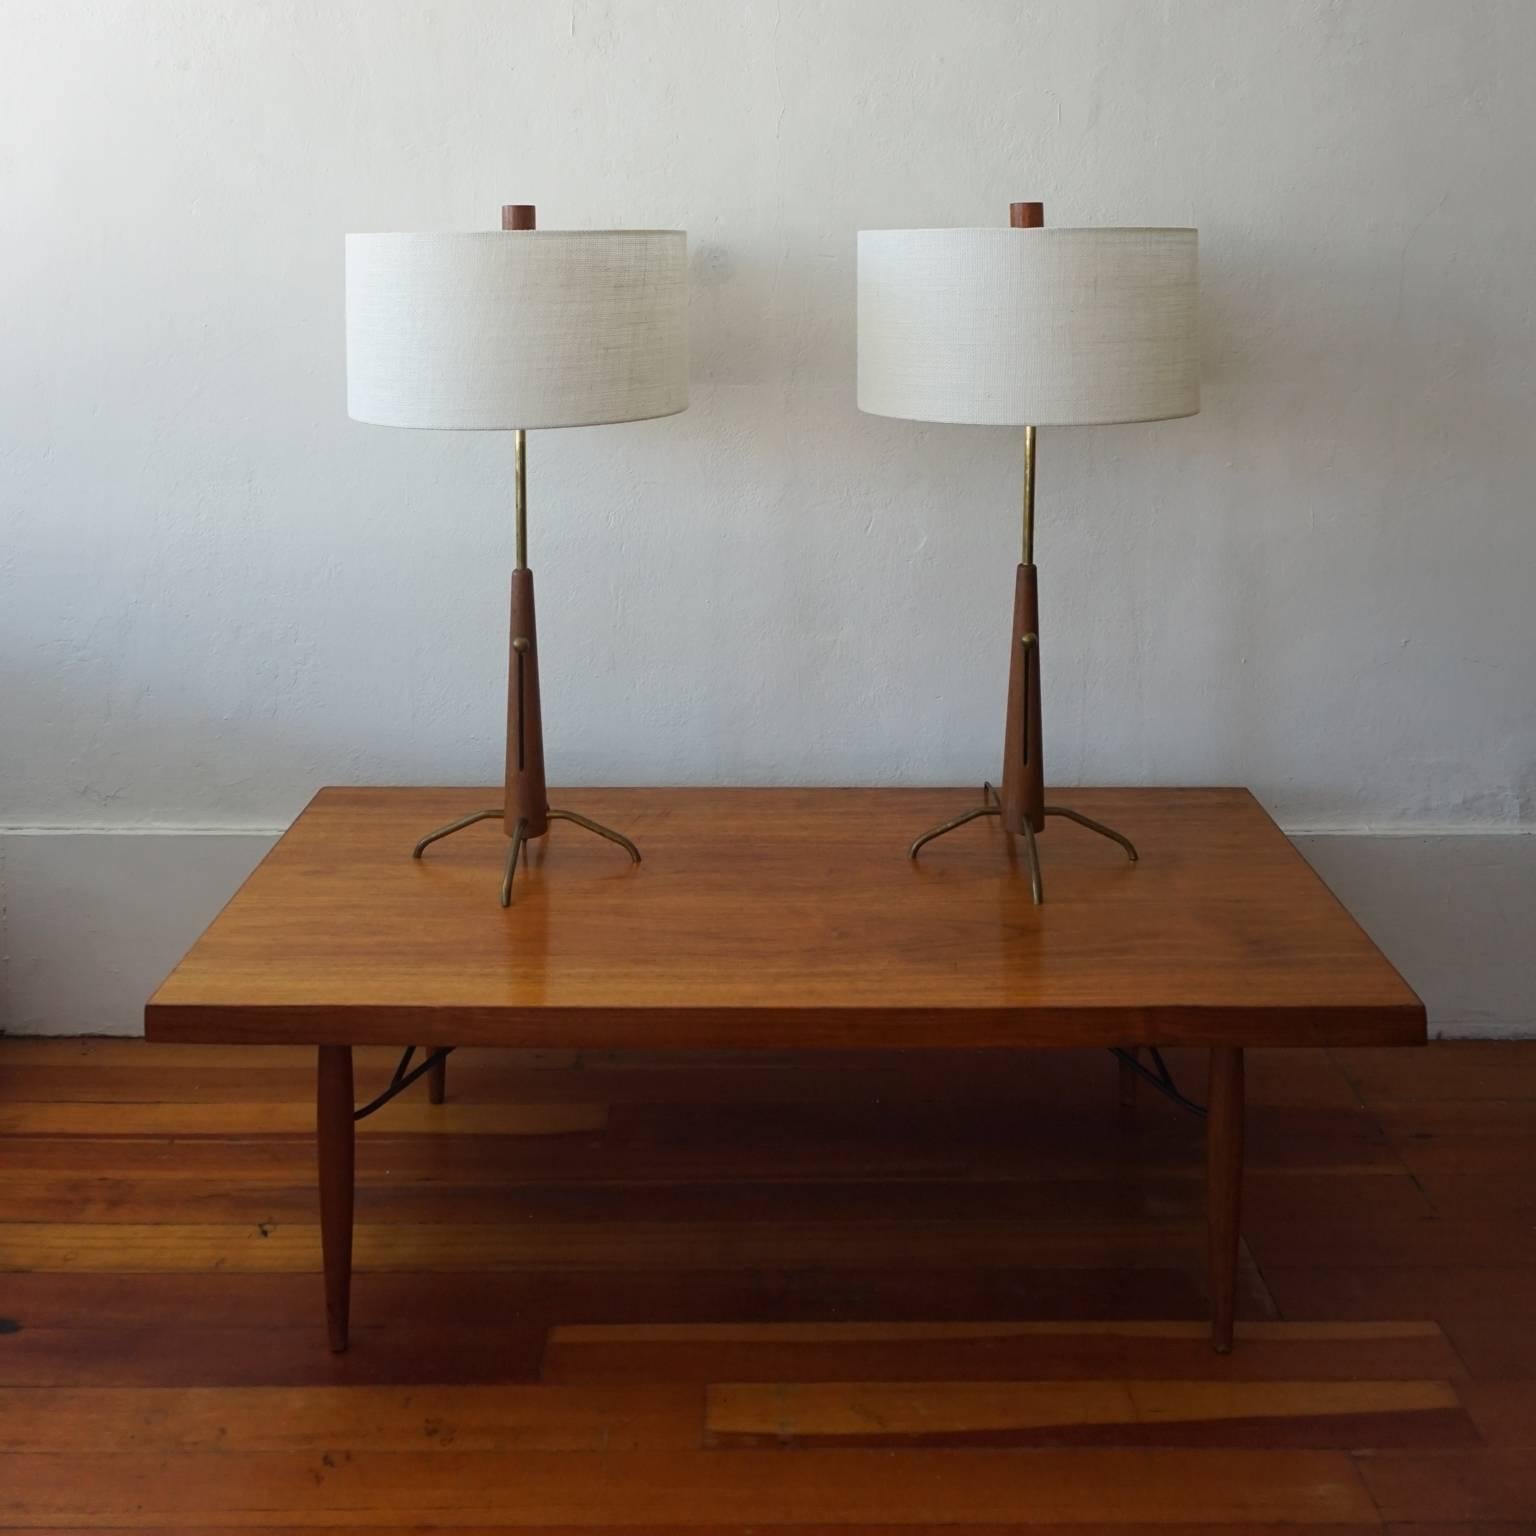 Pair of 1950s walnut and solid brass table lamps designed by Gerald Thurston for Lightolier. Solid brass balls unscrew to allow for sliding height adjustment. New shades and walnut finials. 

Measures: Height adjusts from 24